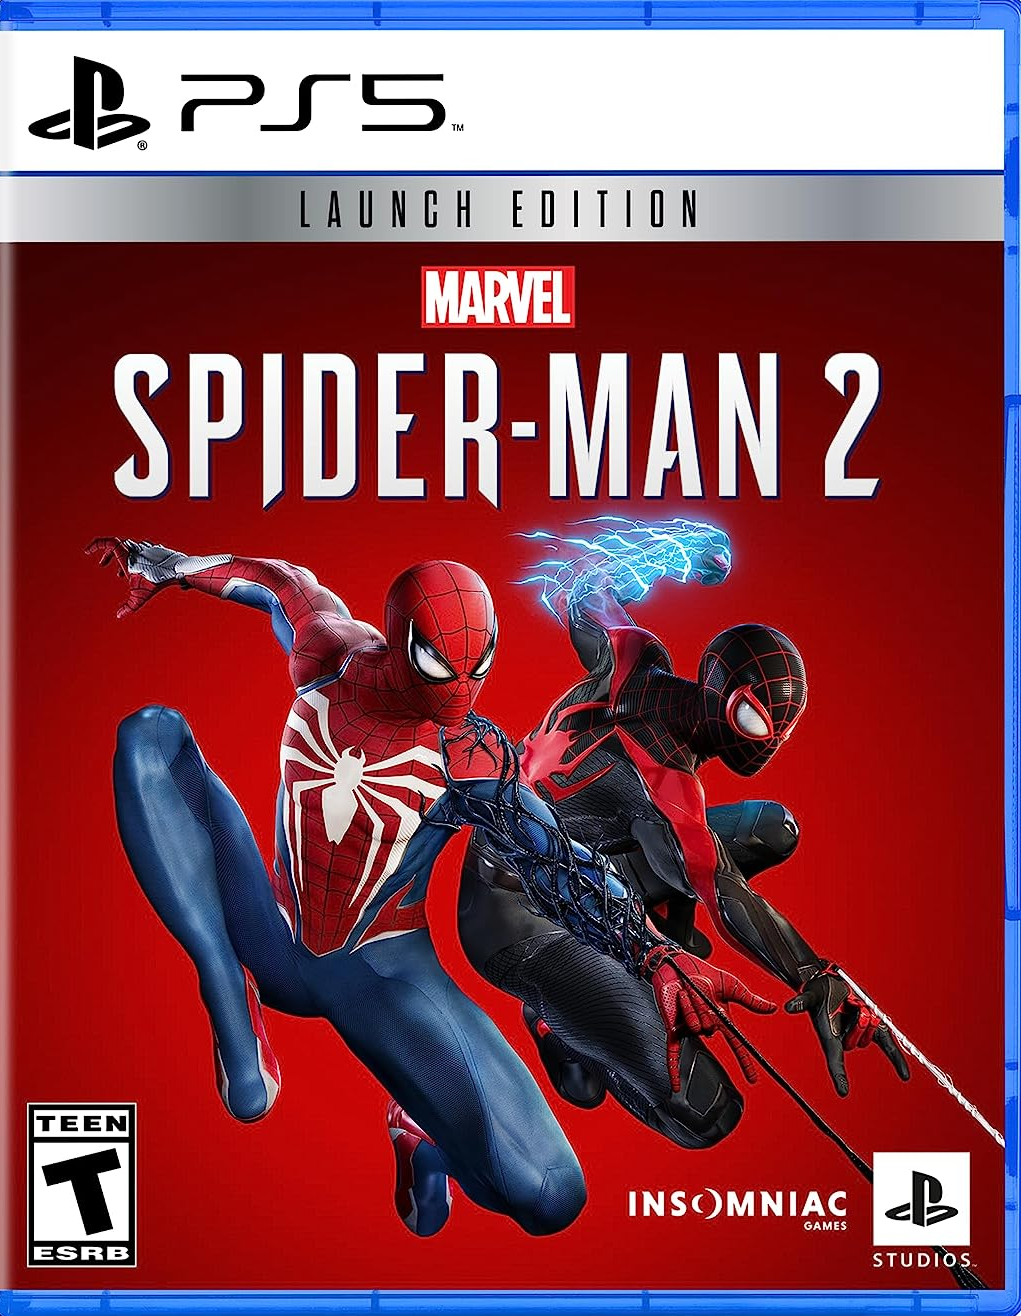 the cover of the video game with both Peter Parker and Miles Morales on it